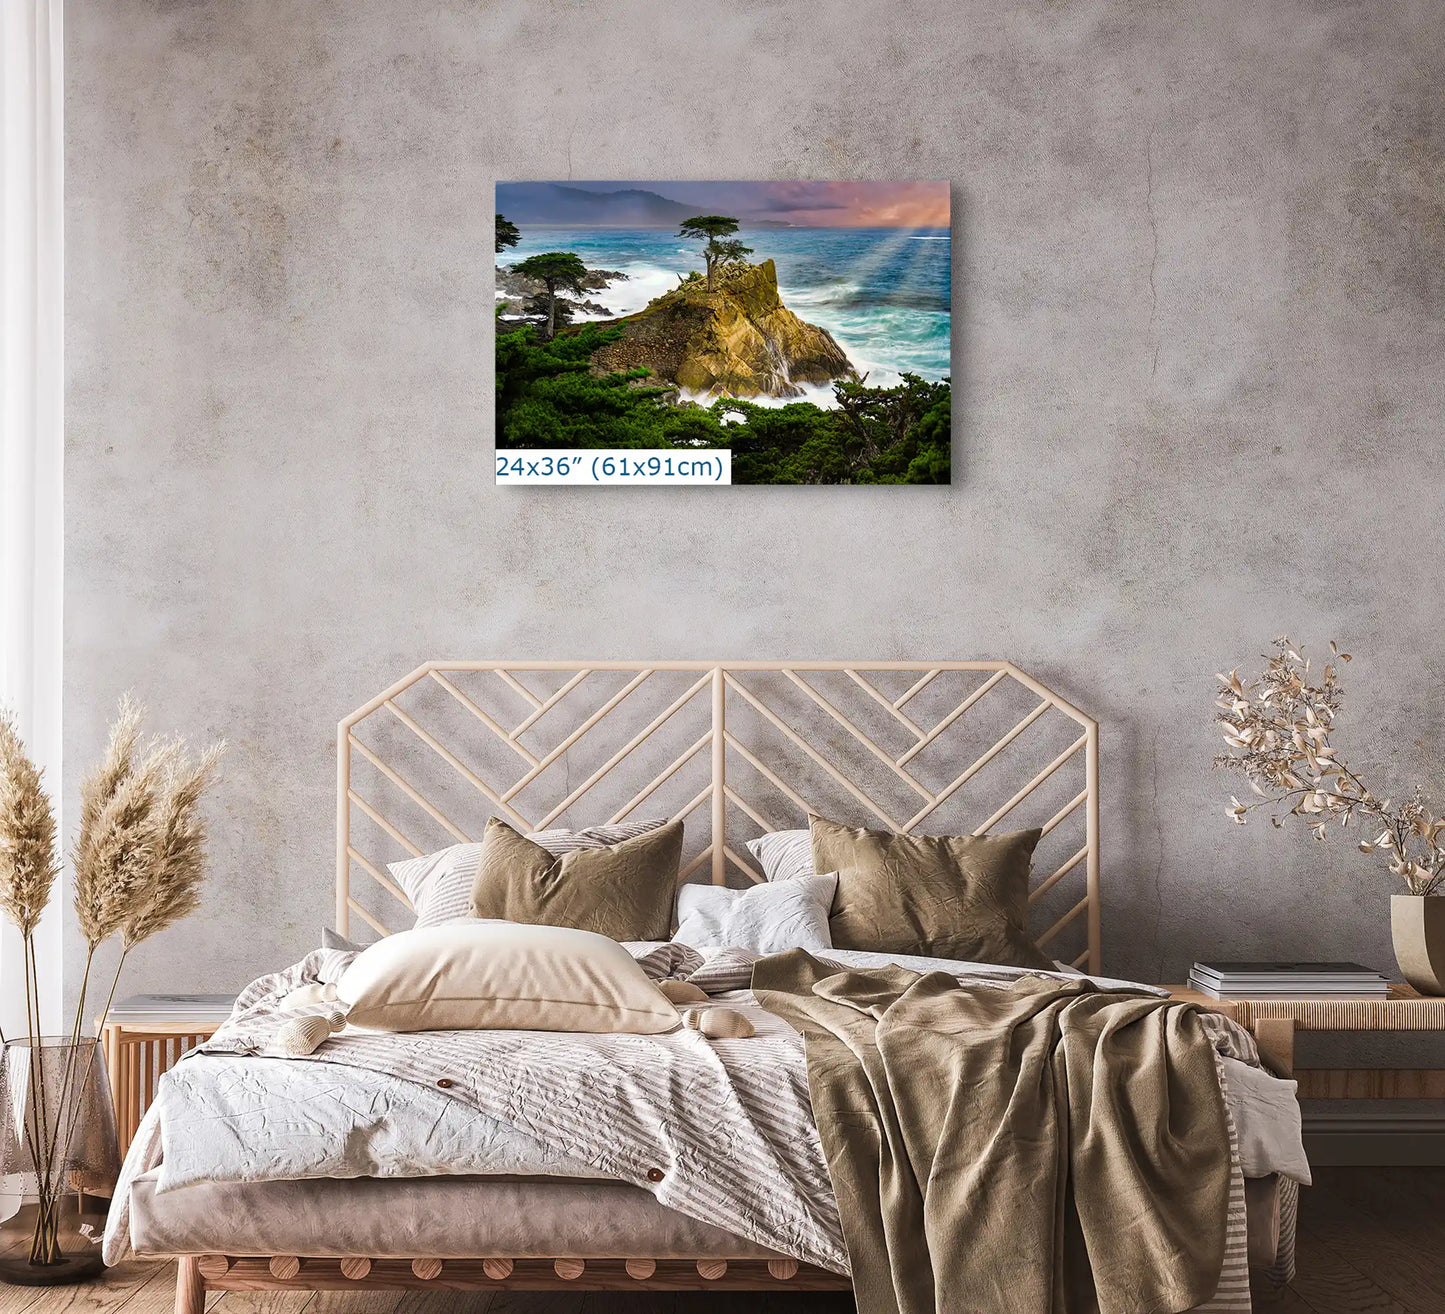 Lone Cypress Photograph Wall Decor shown in 24x36 in a bedroom